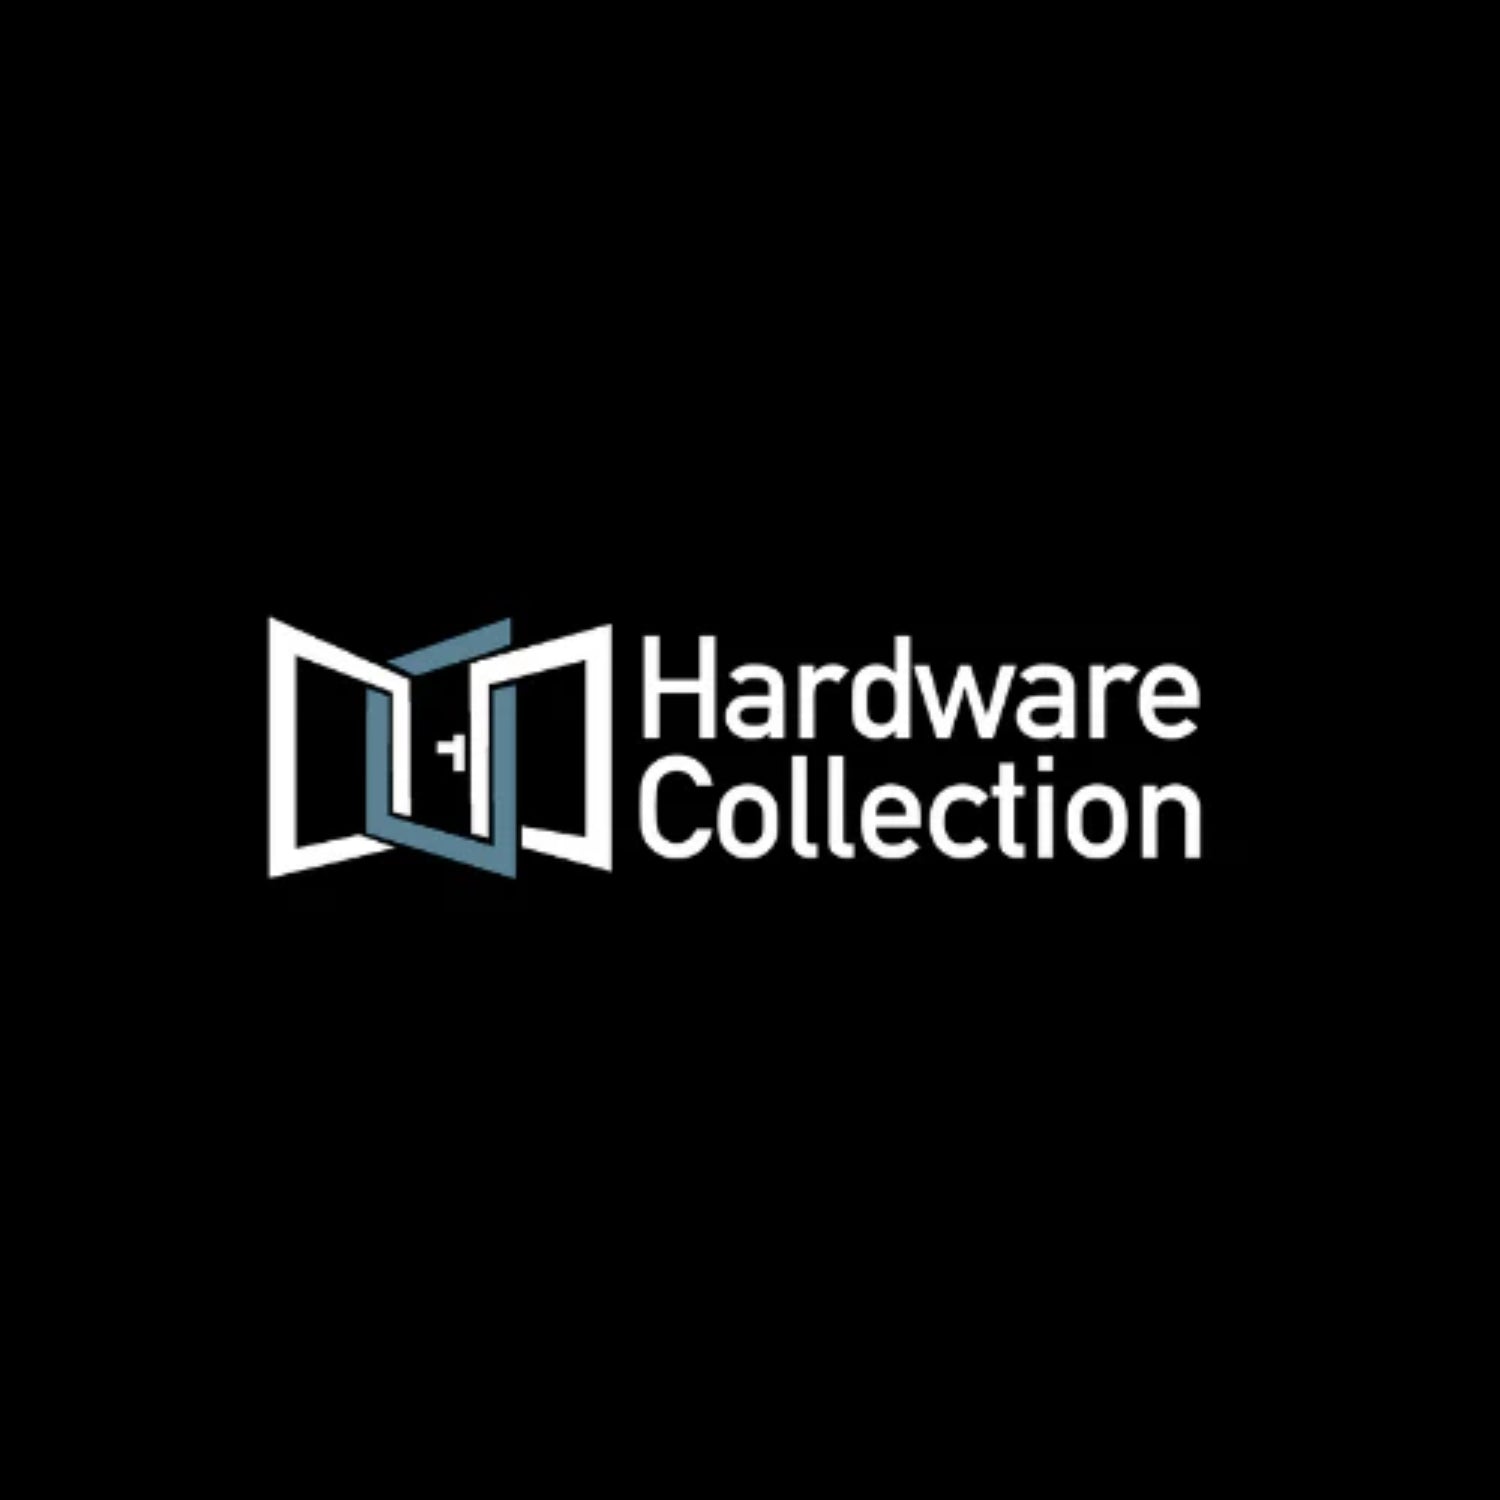 Hardware Collection